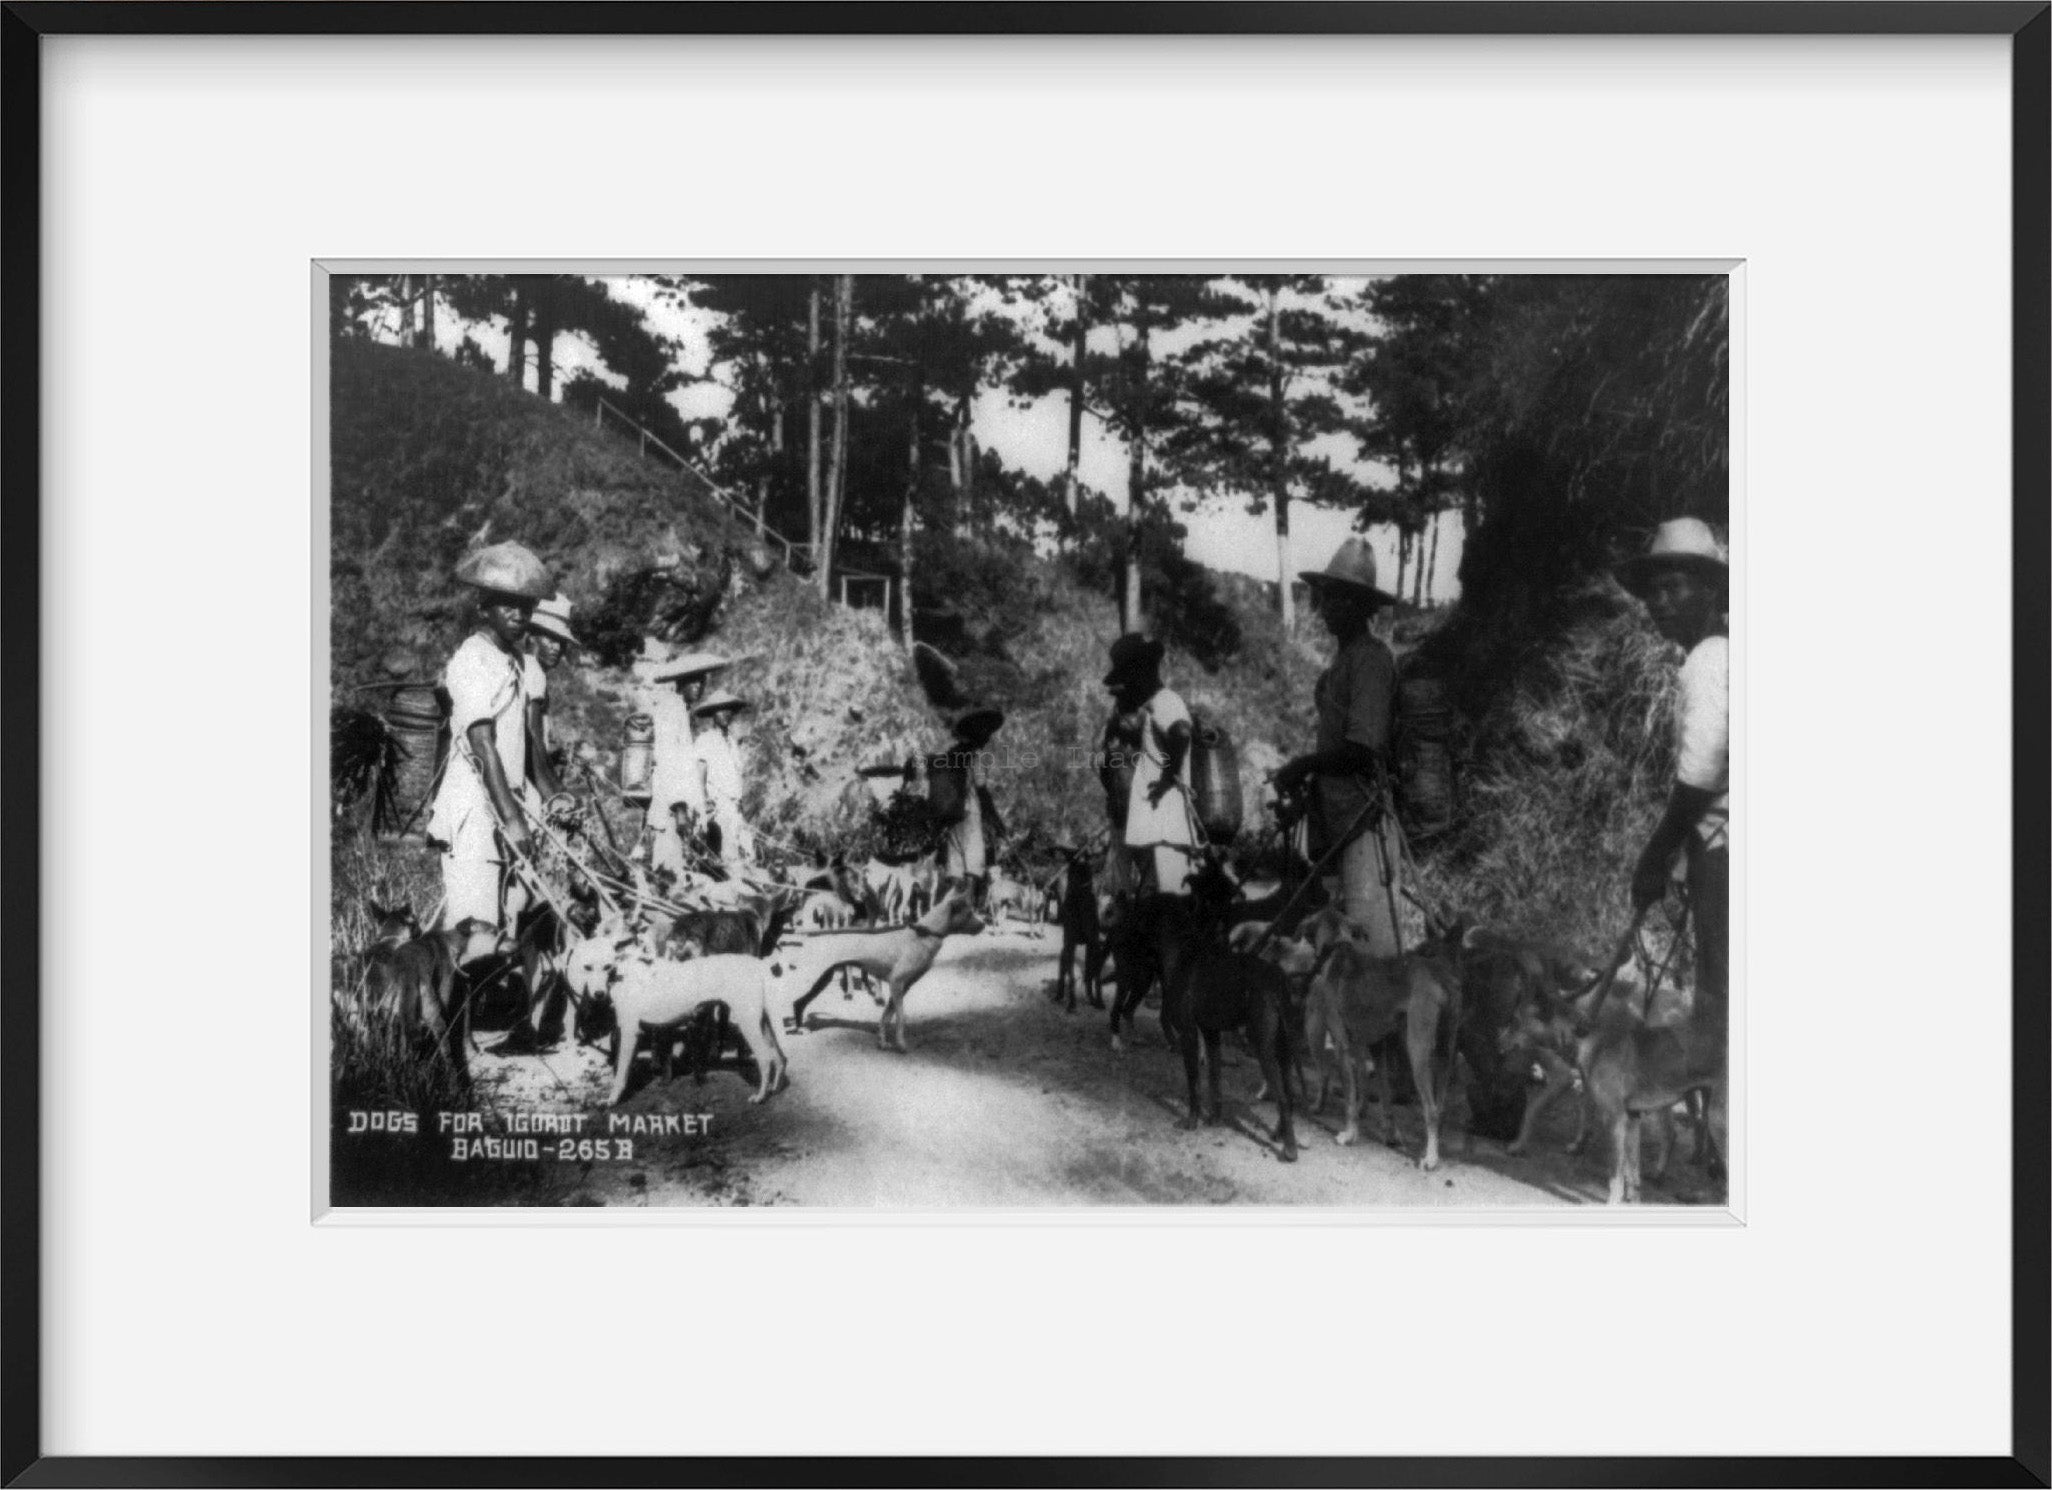 between 1920 and 1925? photograph of Dogs for Igorot market, Baguio Summary: Pos